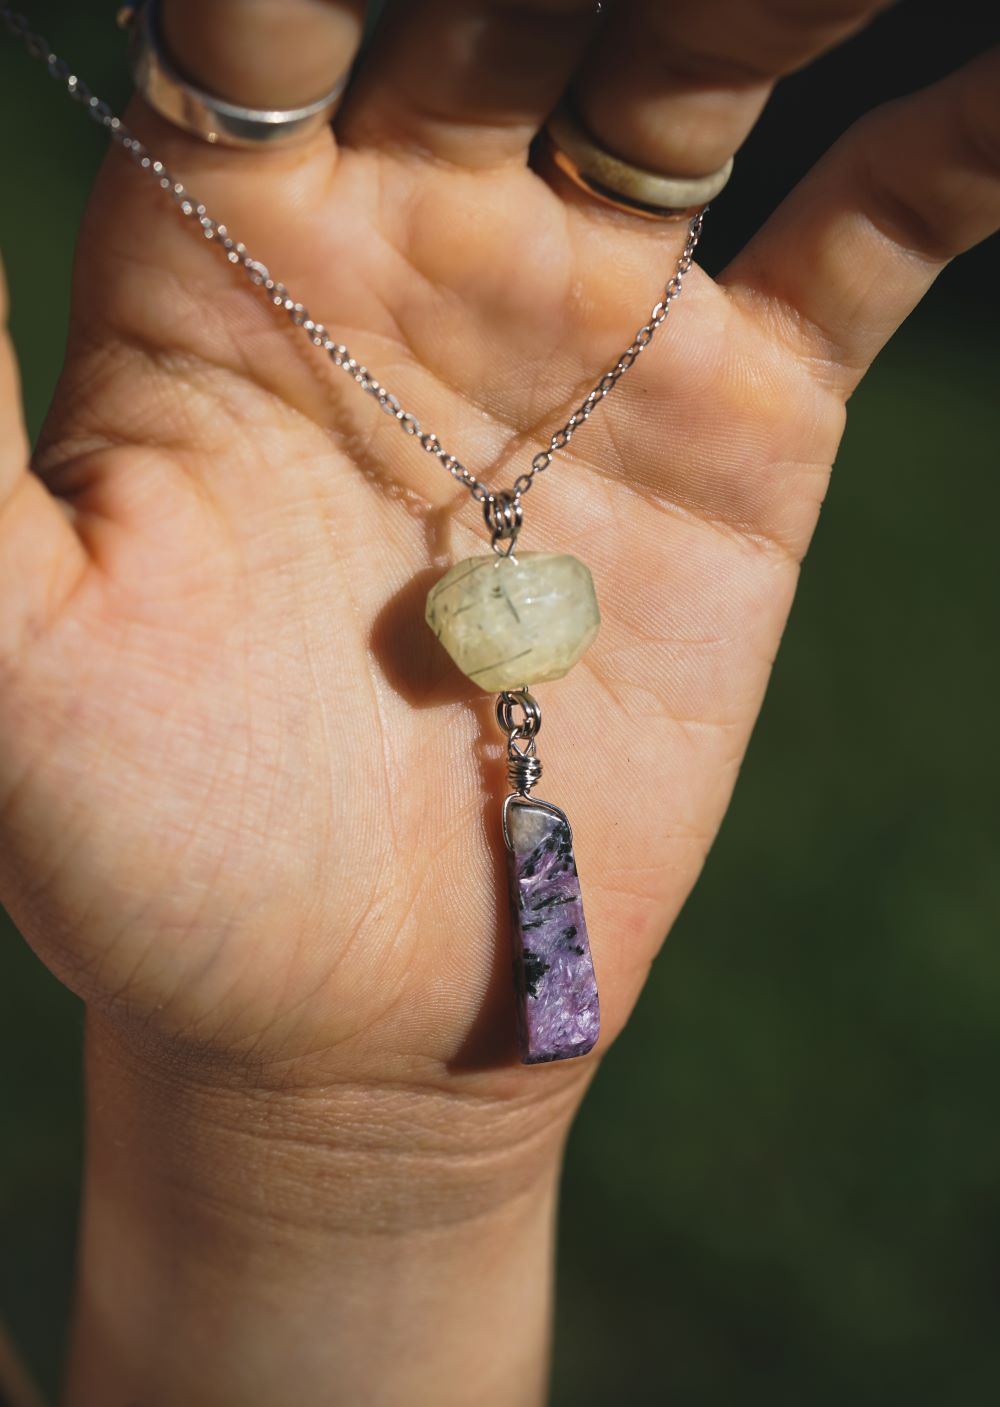 This gorgeous Prehnite stone is about .35" long, while the Charoite is approximately .65" long, both suspended from a 20" long stainless steel chain. In addition, I infuse each of my handcrafted crystal designs with Reiki energy and charge and clear them with sunlight, moonlight, and sage, which amplifies not only the stones but your intentions as well. This necklace came to be for a specific person and situation, there are no coincidences, so if you stumbled across this page, maybe it was meant for you:)